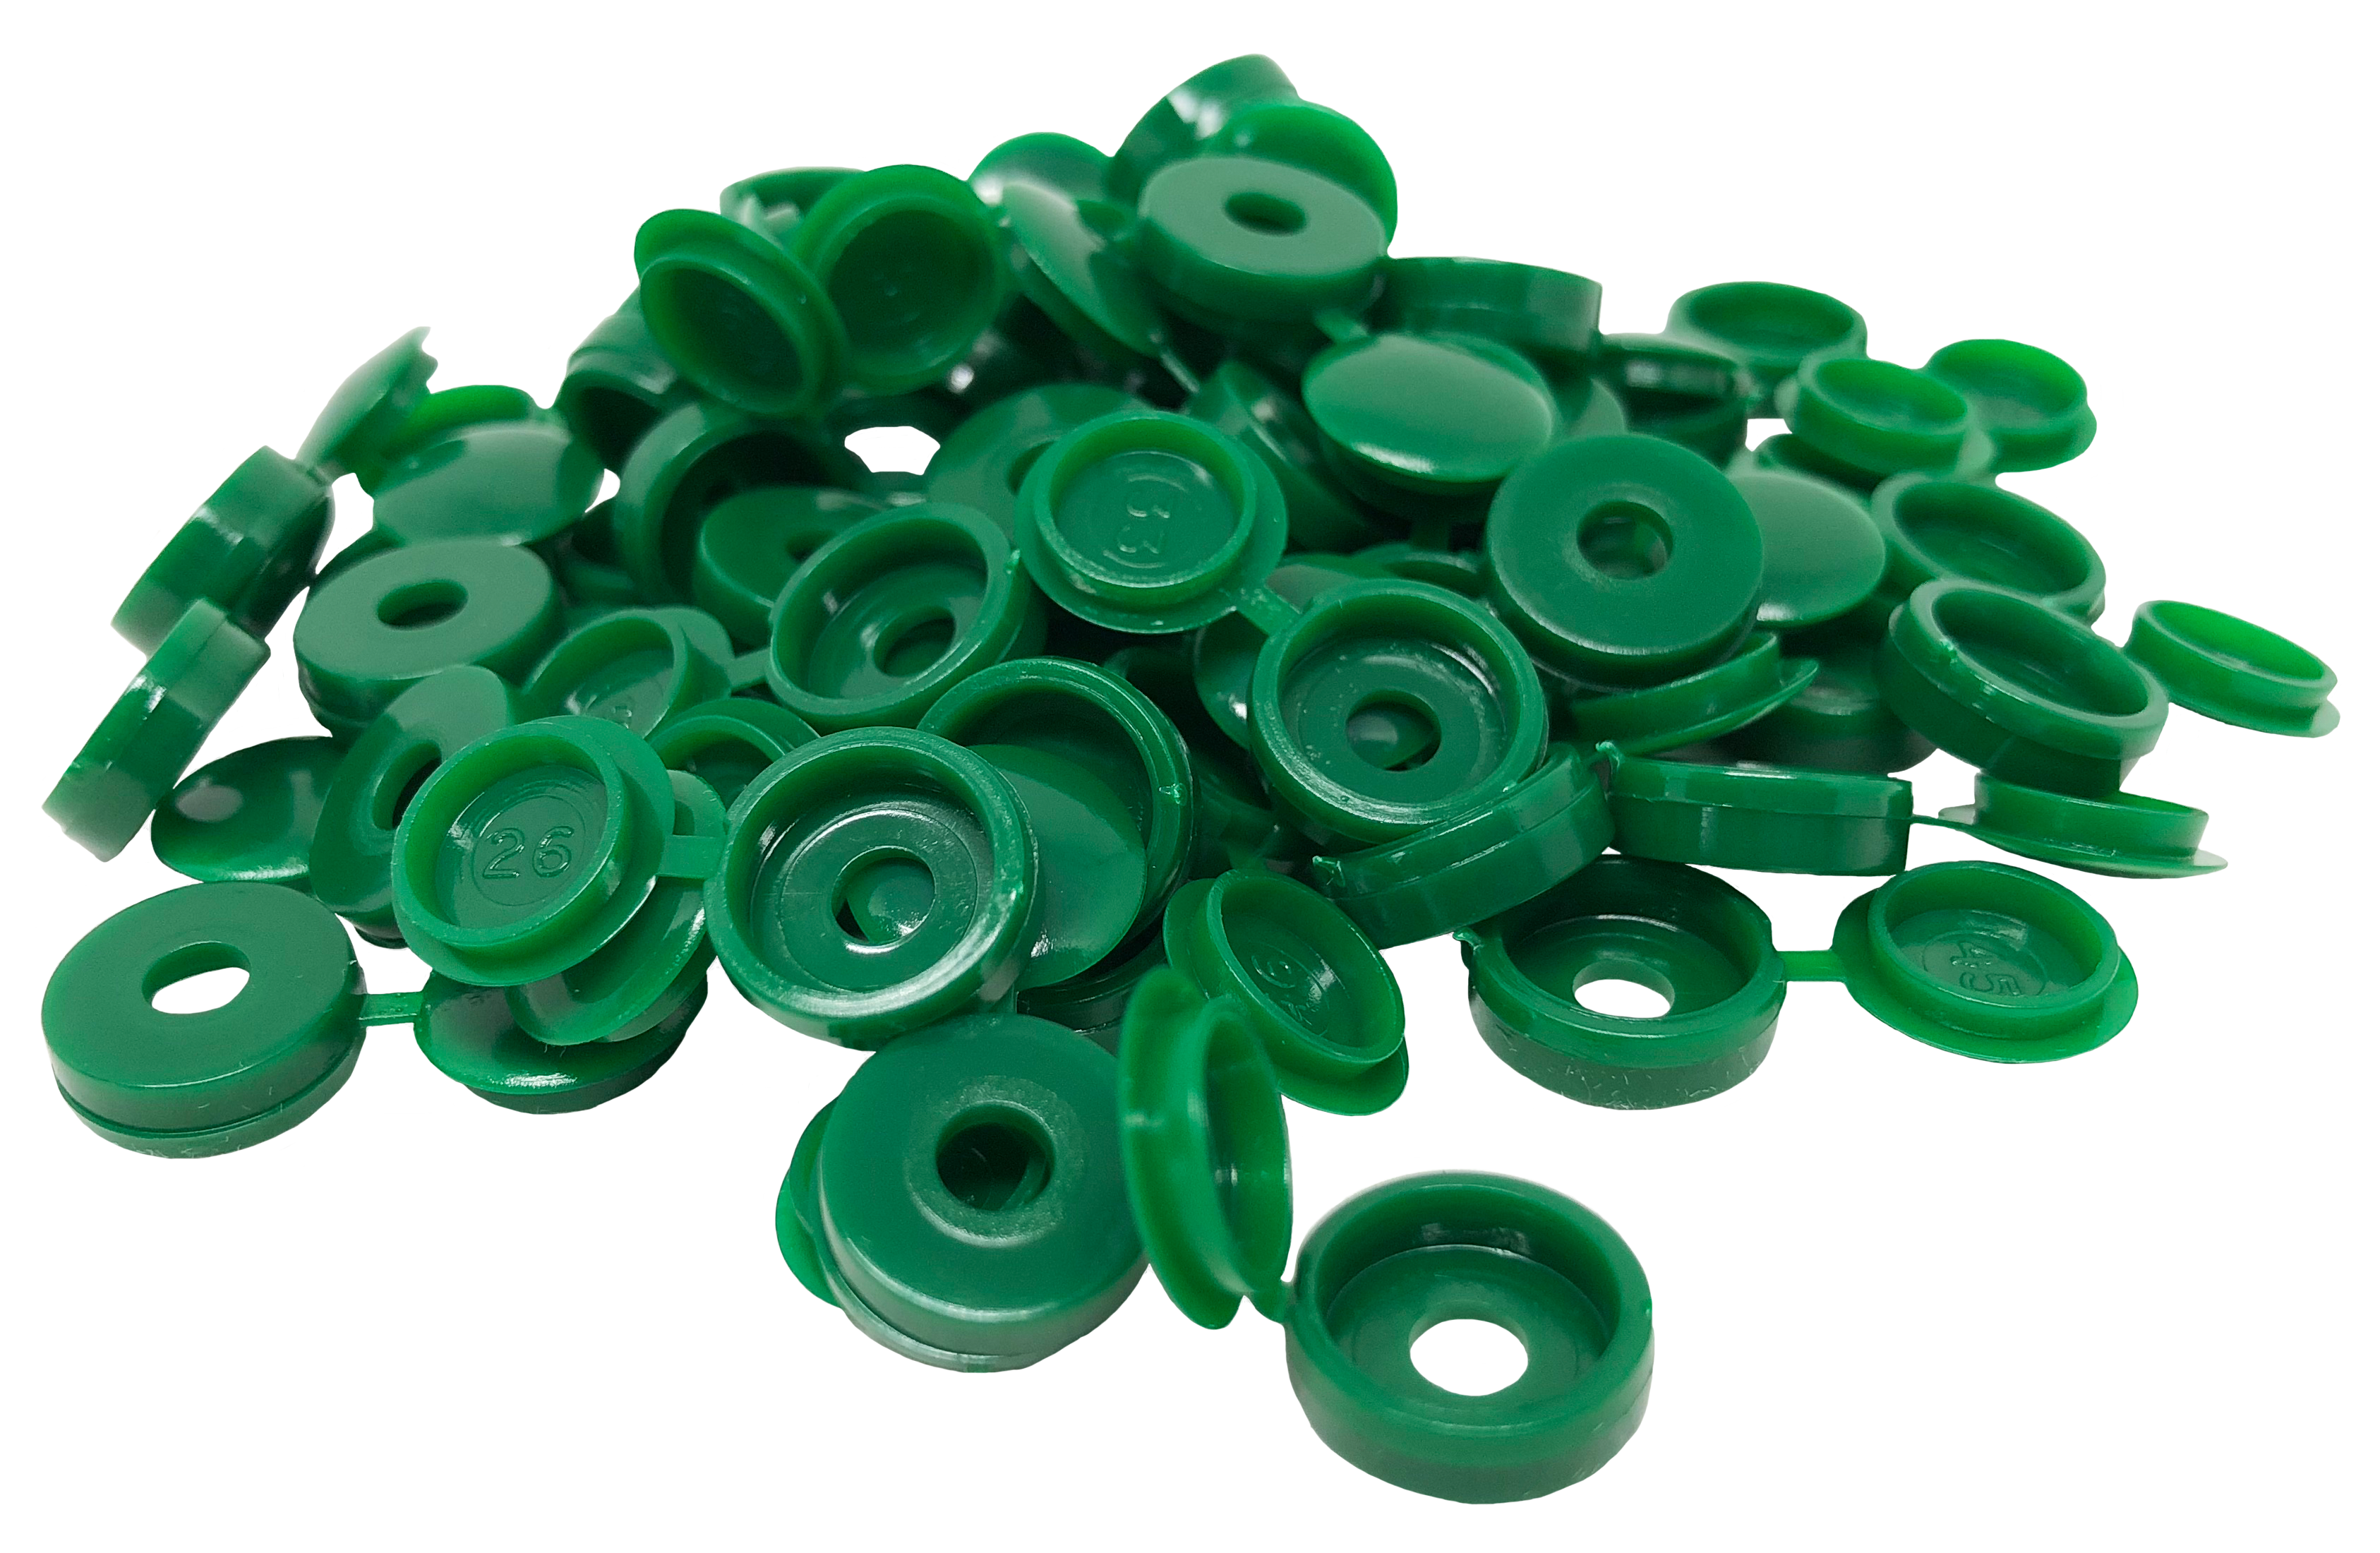 Hinged Screw Cover Caps 6g-8g Green